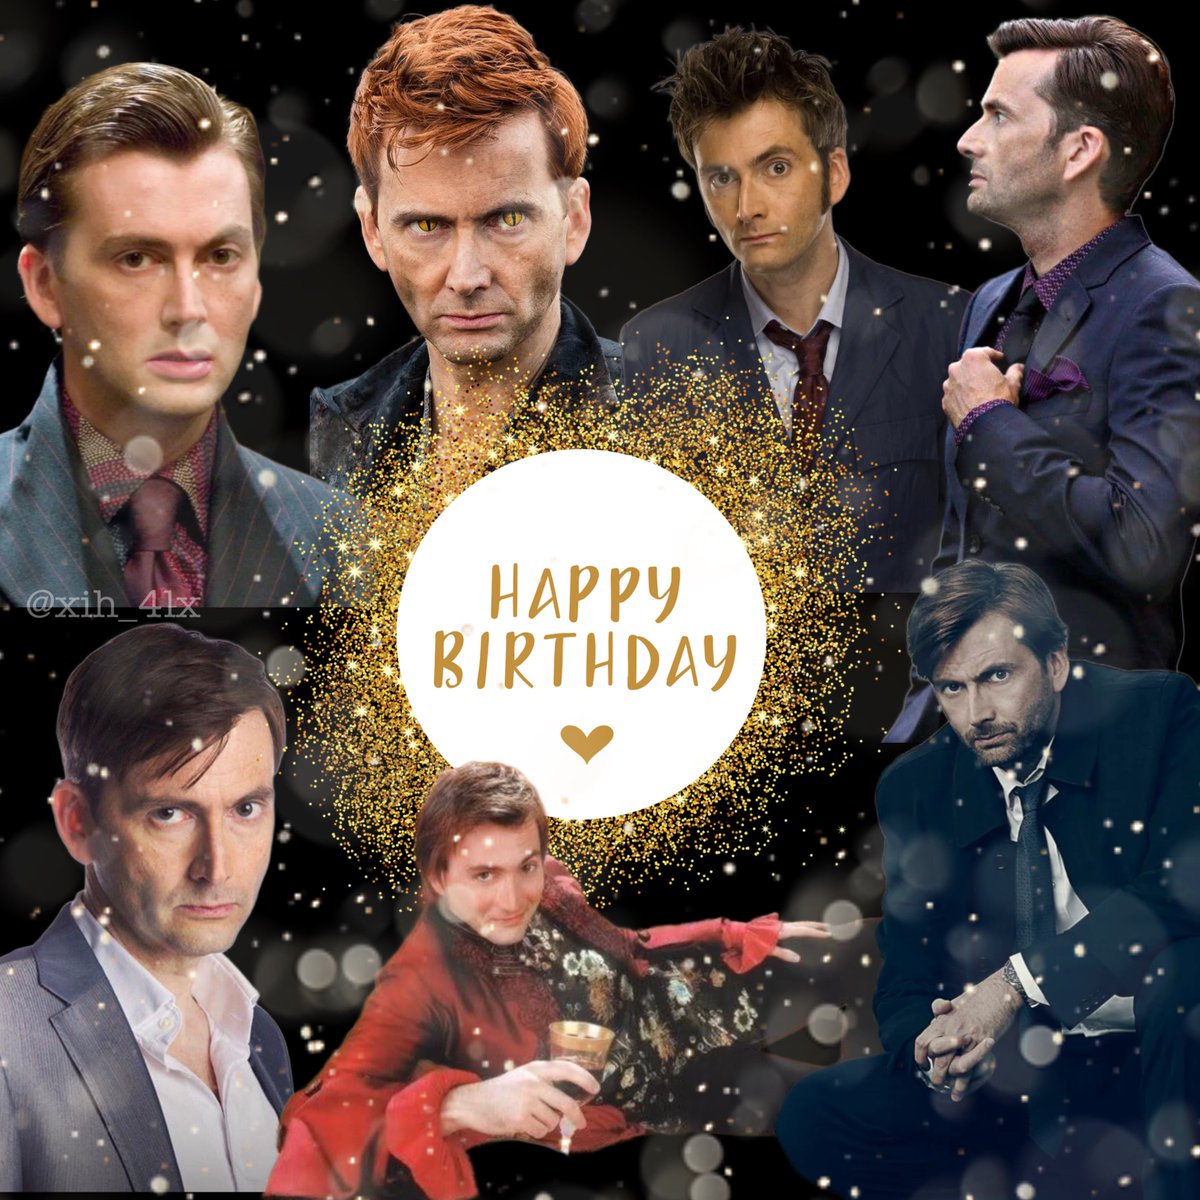 Happy birthday to the one and only #DavidTennant! The ultimate Doctor™️, the cuntiest demon Crowley, the grumpiest DI Alec Hardy, the scariest mind controller Kilgrave, the blue eyed Casanova and so many more!

I wish you the best birthday ever because you deserve the world!